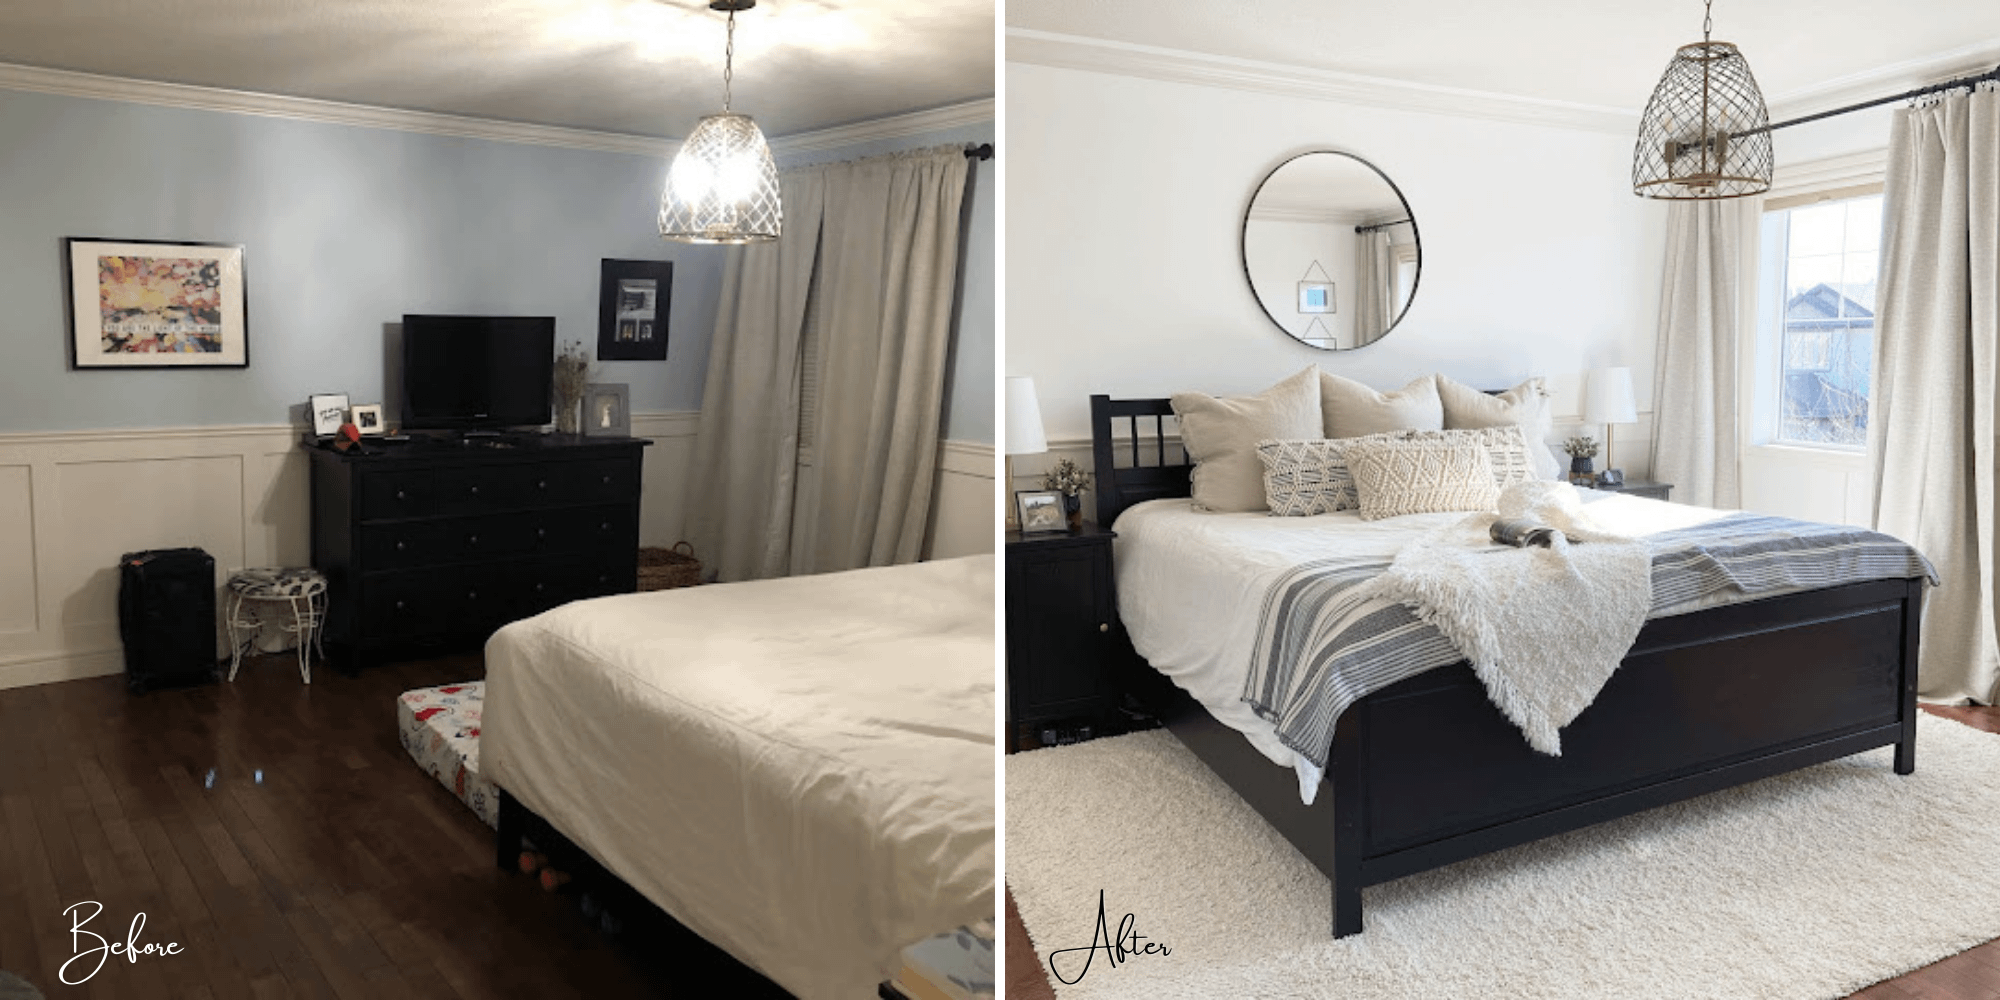 Before and after of a peaceful bedroom makeover.